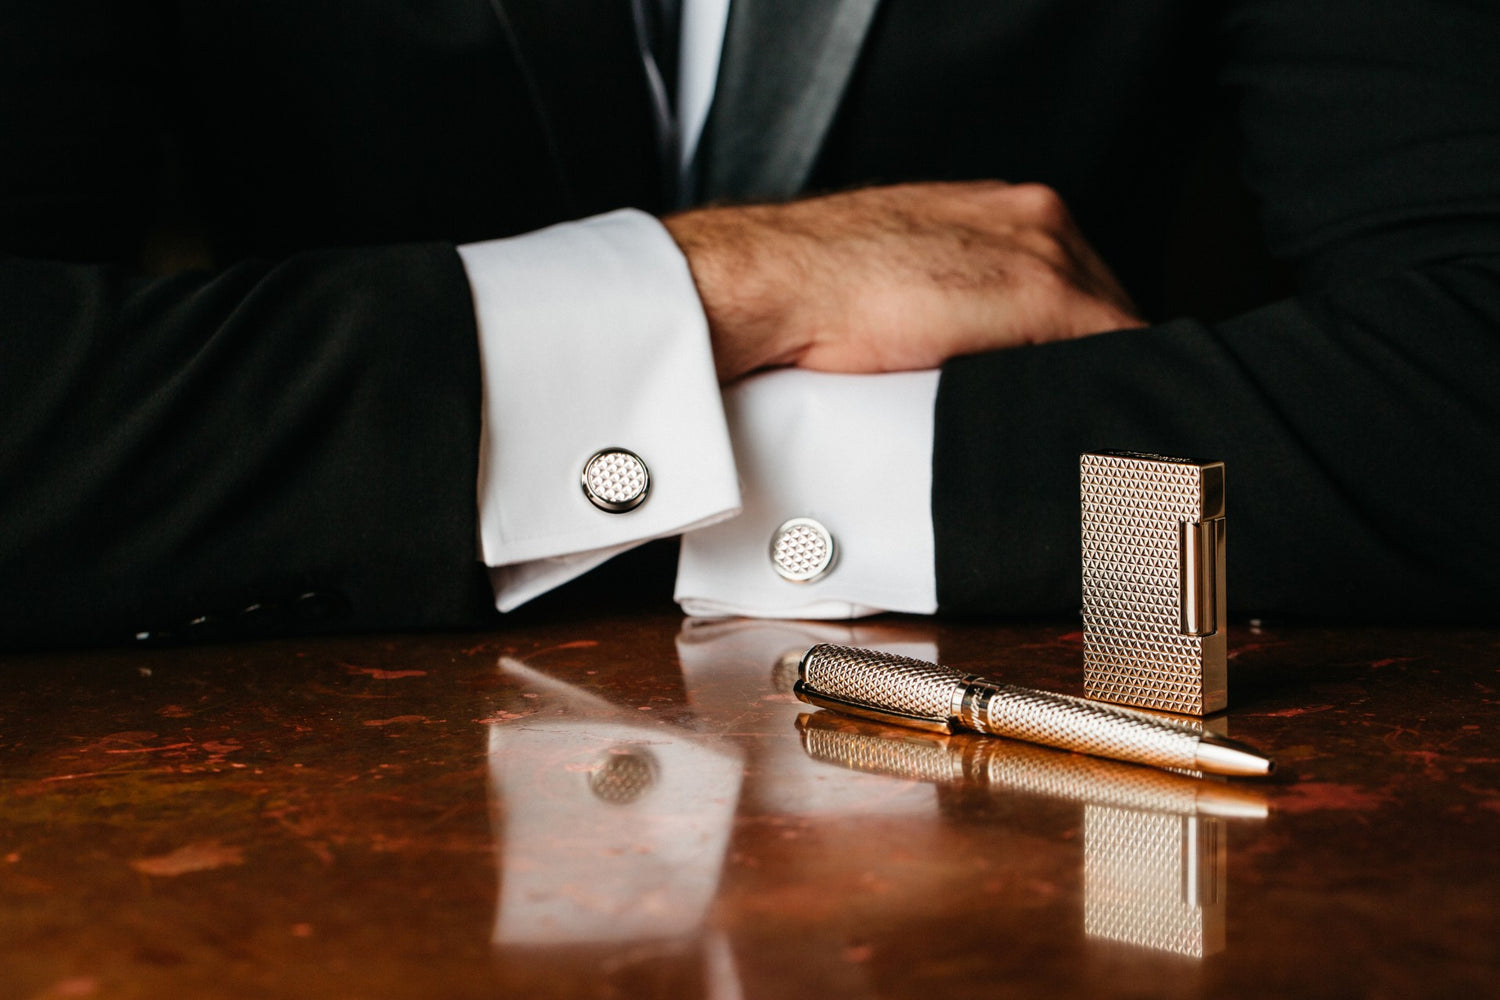 Elegant S.T. Dupont gold lighter and pen set on a reflective table beside a man in a suit with cufflinks